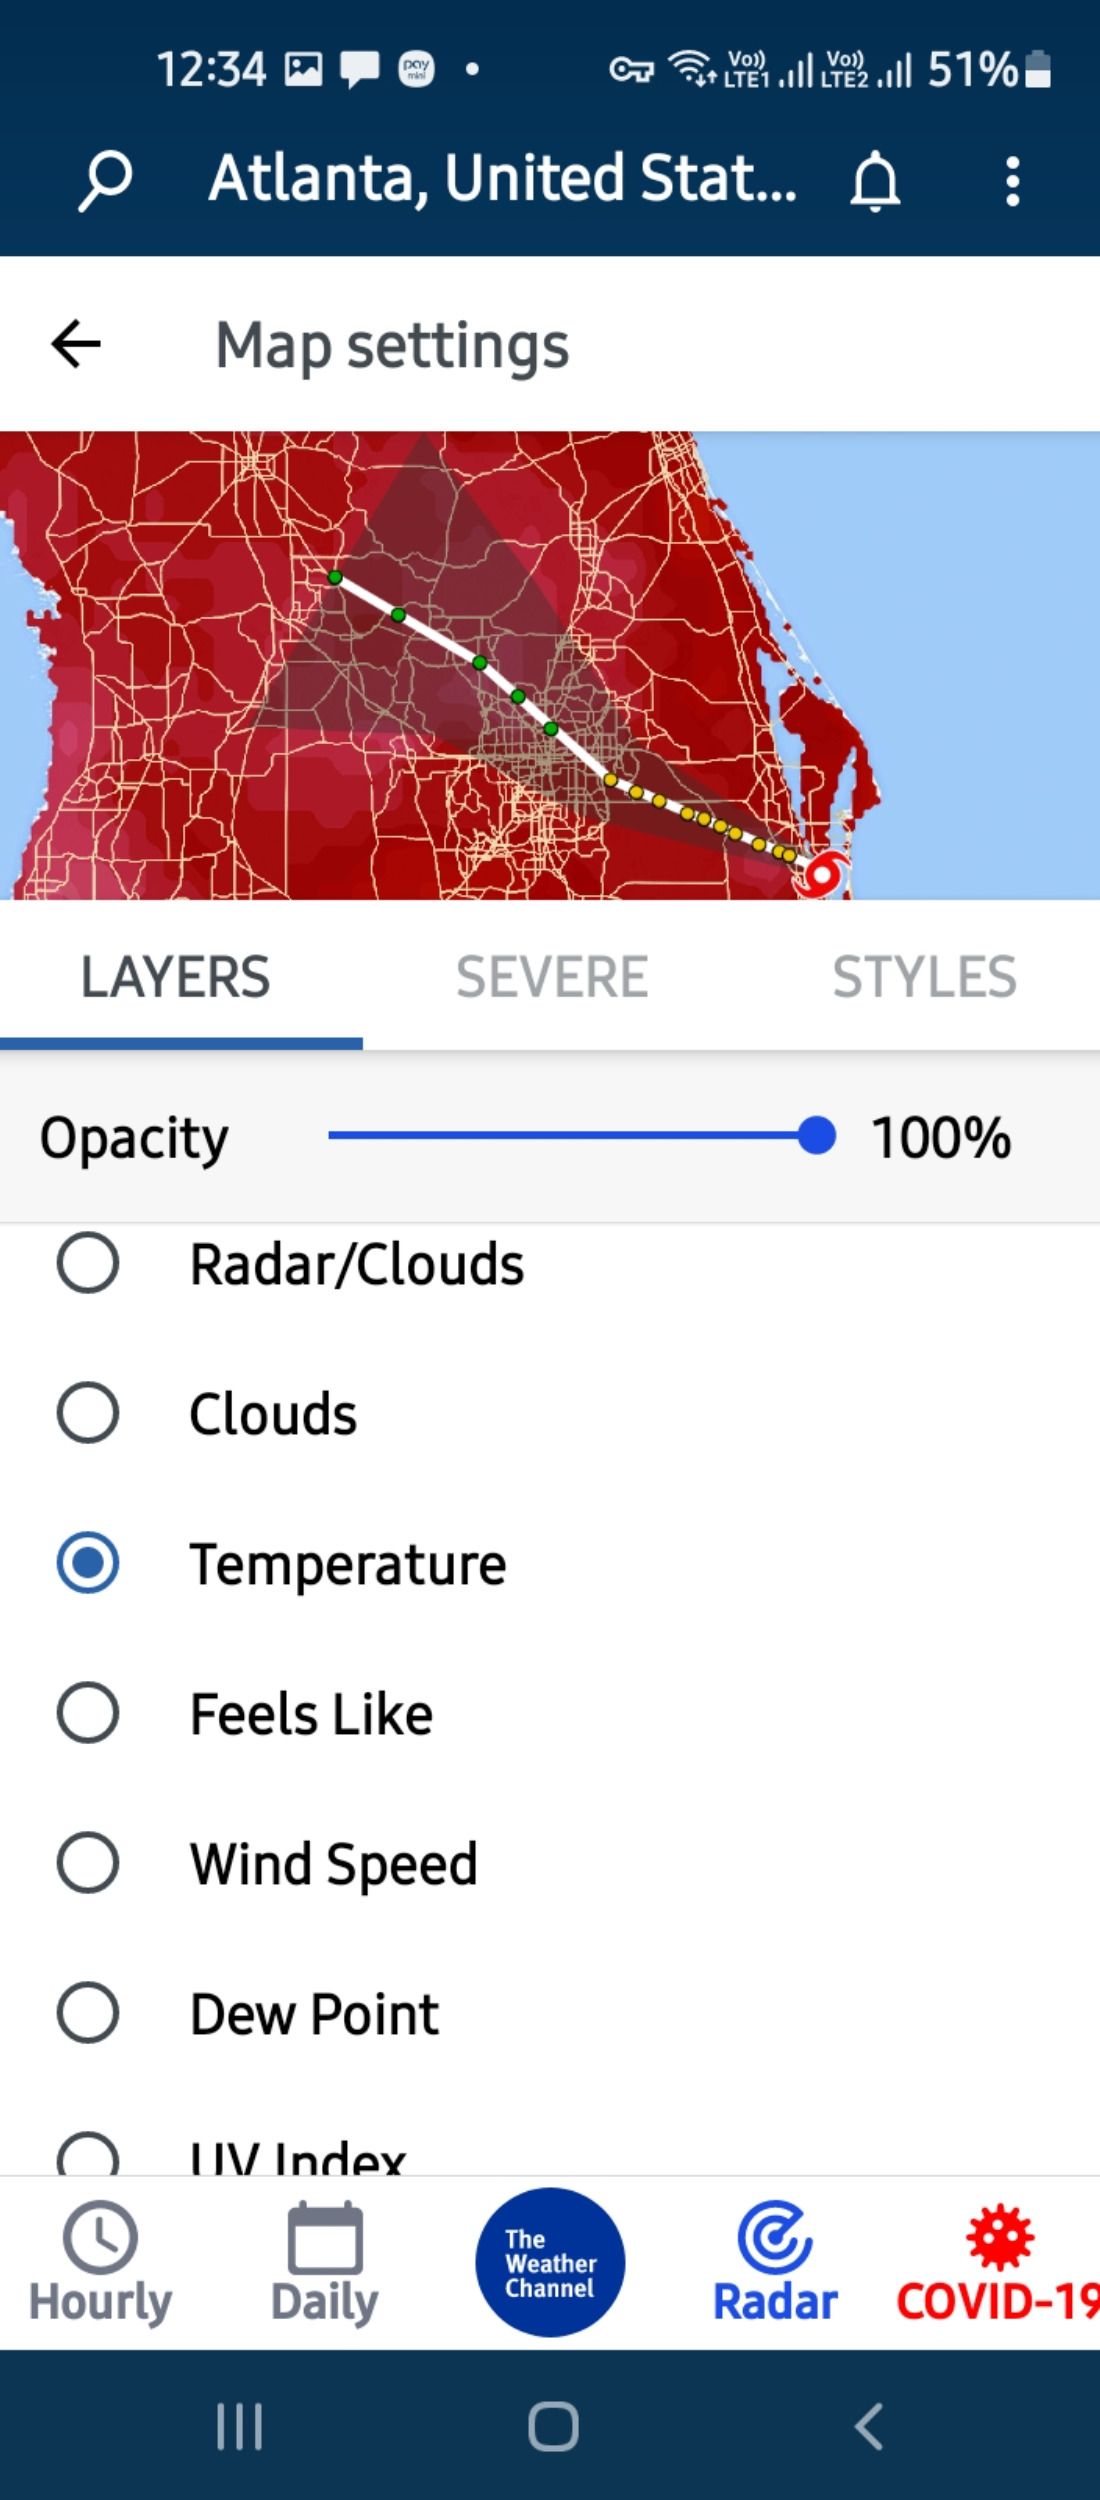 Map navigation settings in Weather channel app